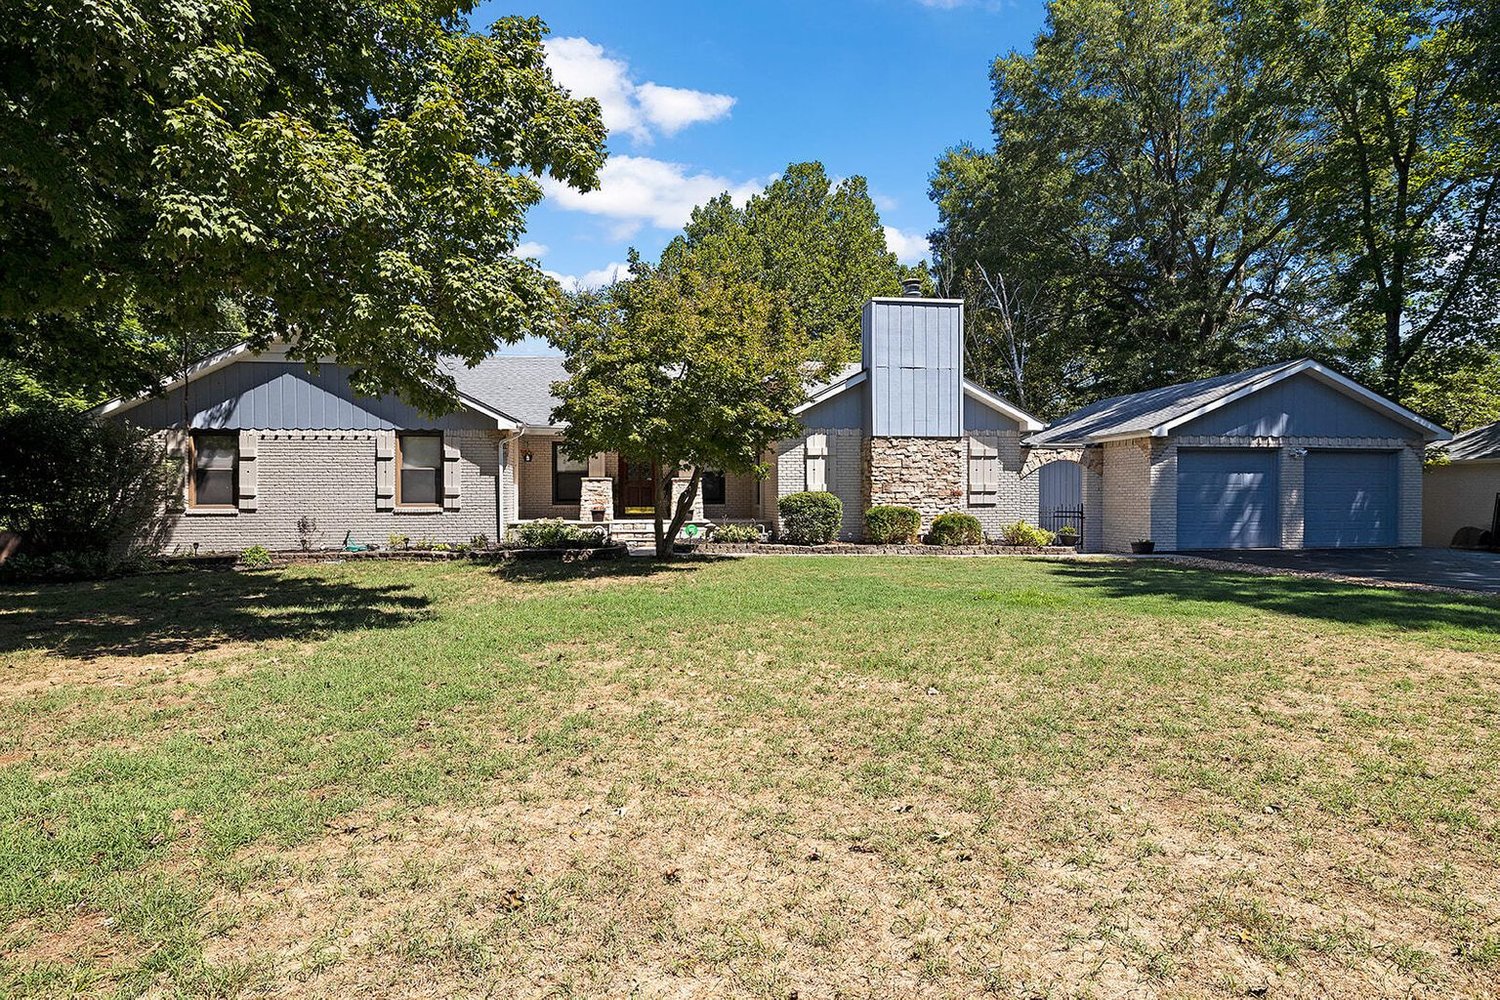 5924 S. Hilltop Drive
$559,000
Bedrooms: 4
Bathrooms: 4
Listing firm: Cantrell Real Estate